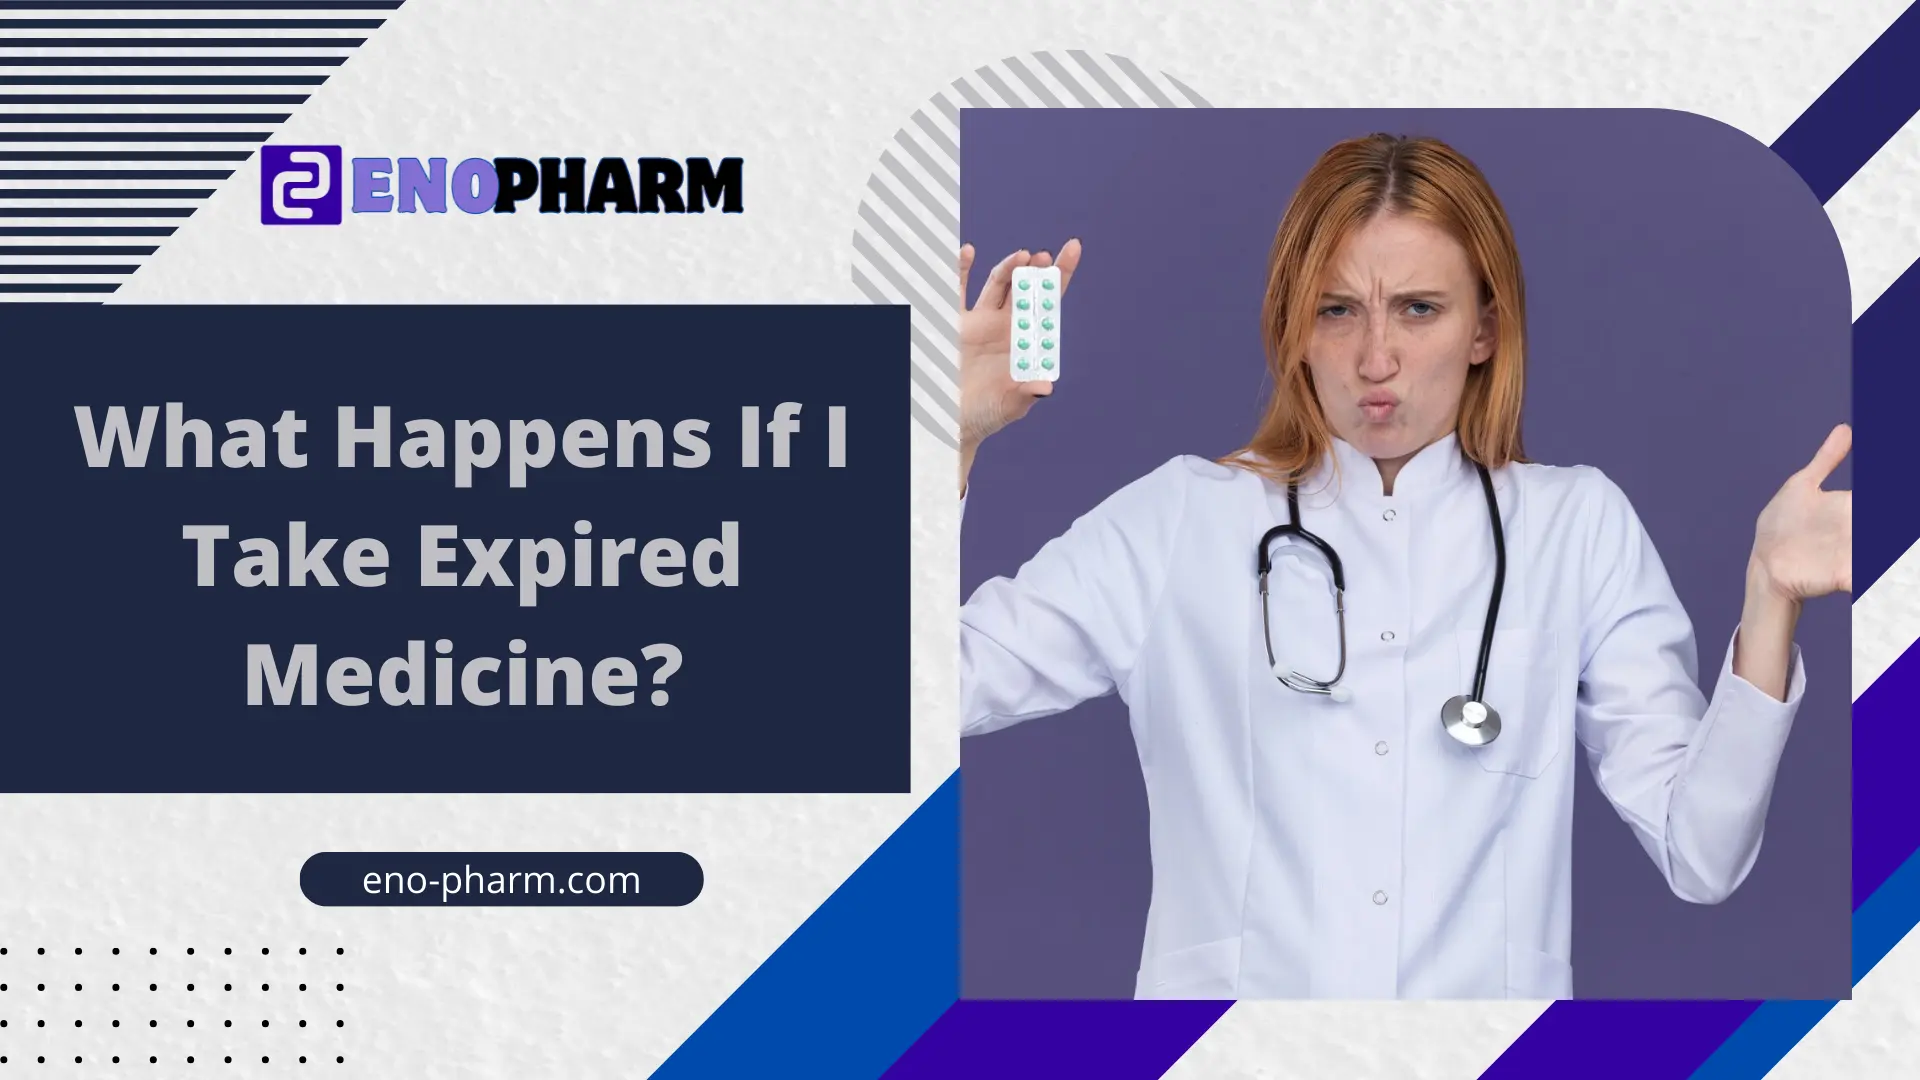 What Happens If I Take Expired Medicine